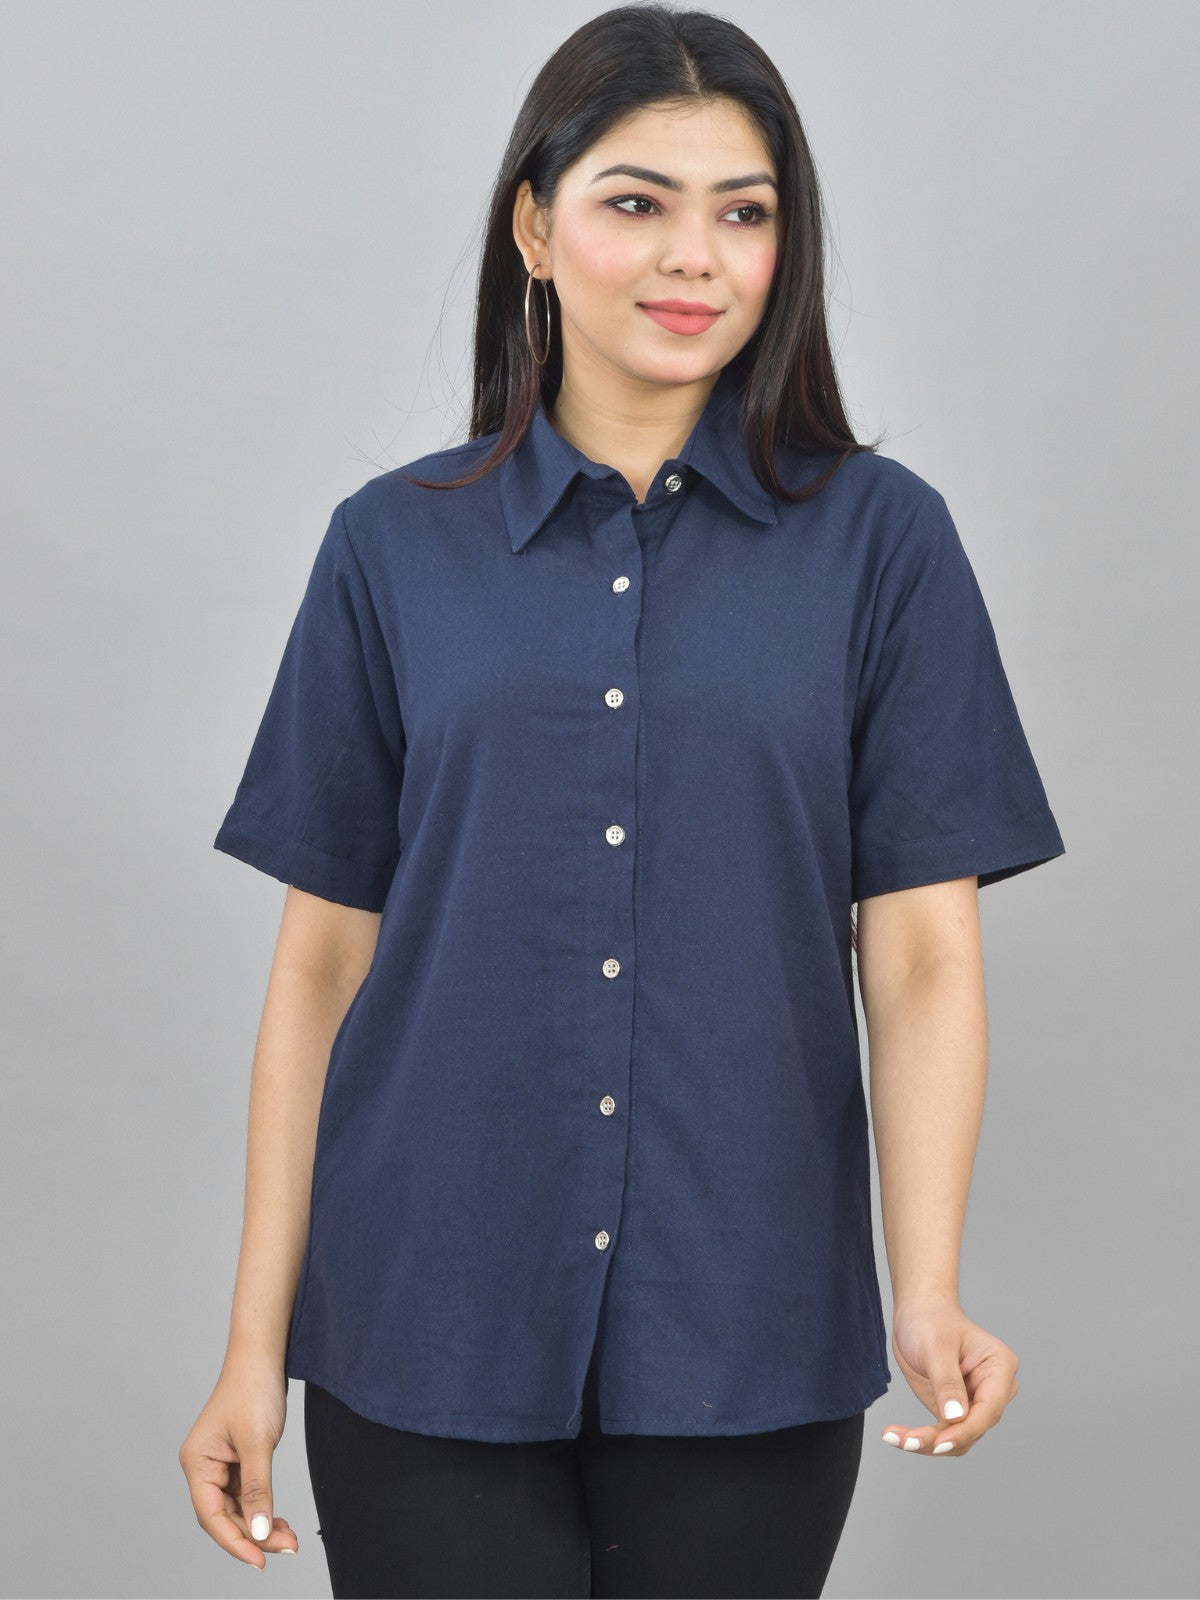 Pack Of 2 Womens Solid Mustard And Navy Blue Half Sleeve Cotton Shirts Combo